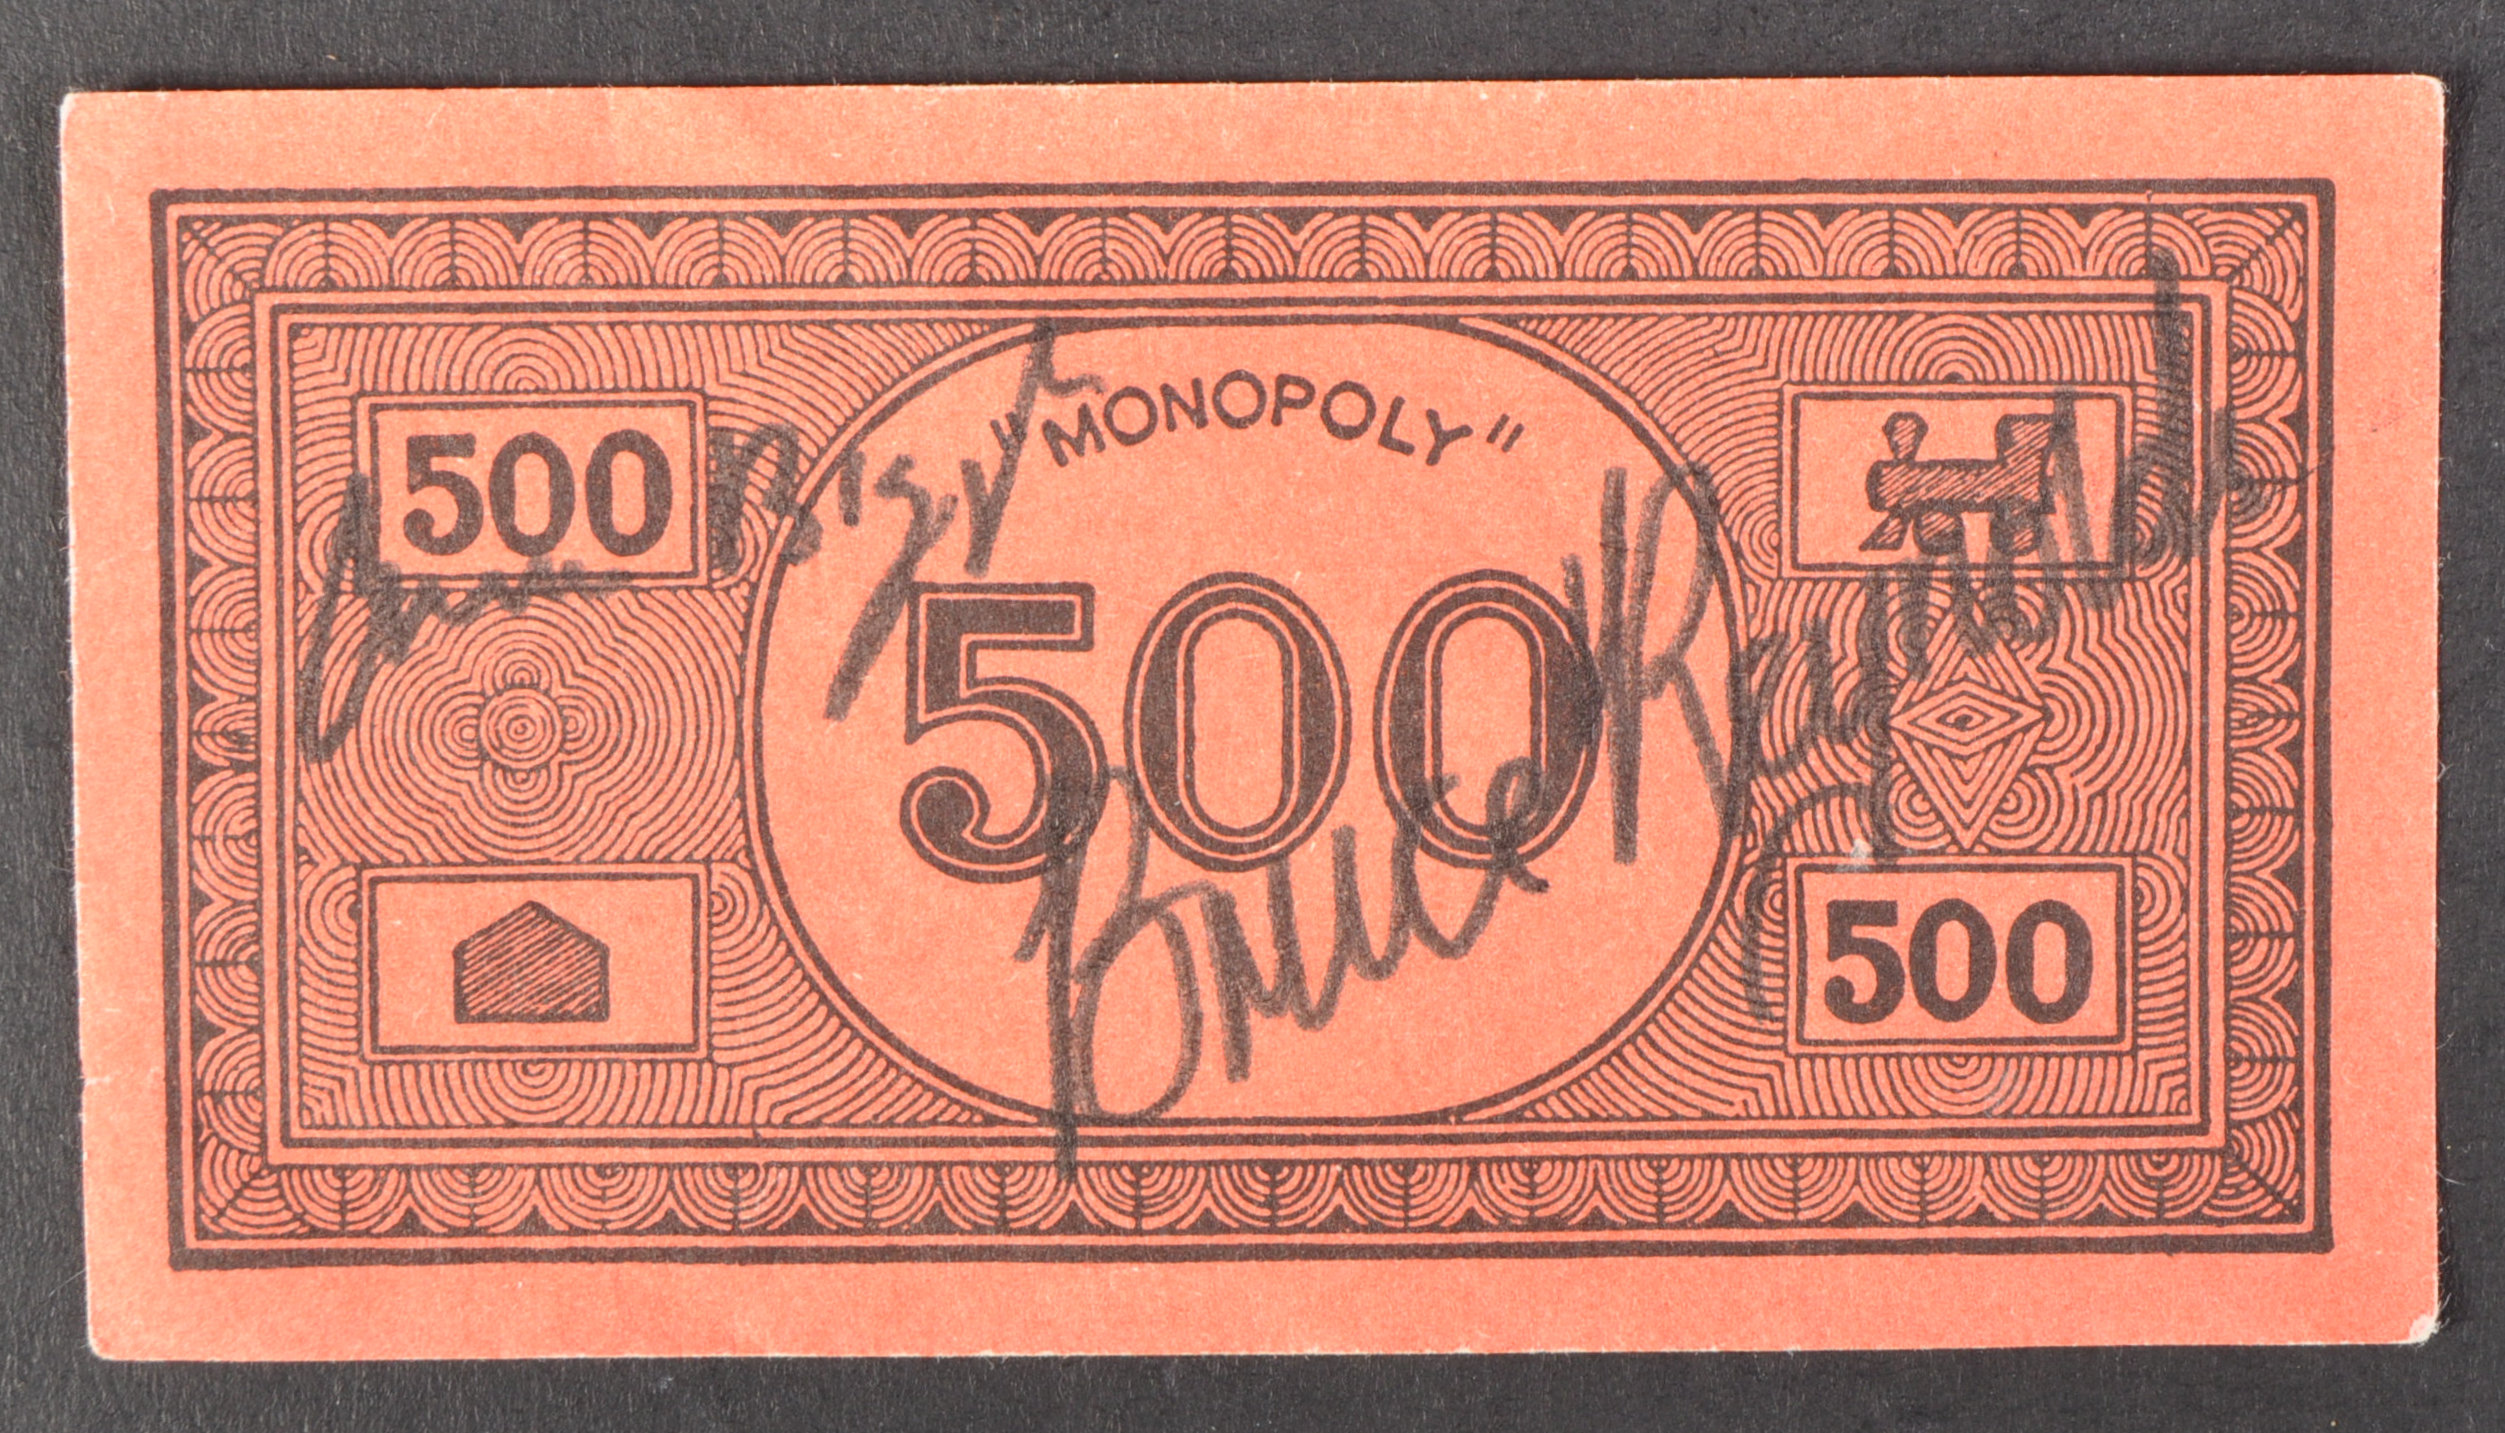 GREAT TRAIN ROBBERY - DUAL SIGNED MONOPOLY BANK NOTE